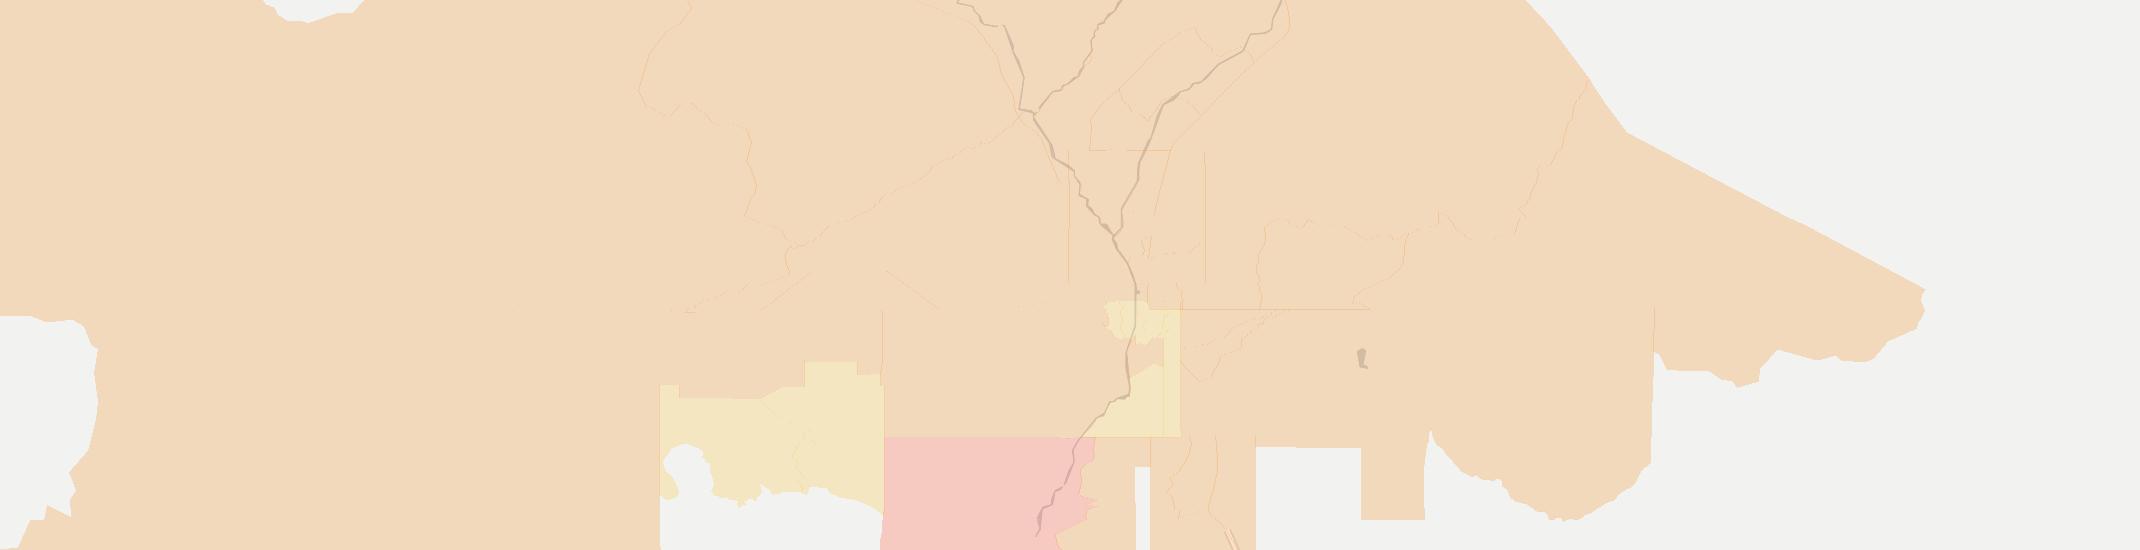 Espanola Internet Competition Map. Click for interactive map.